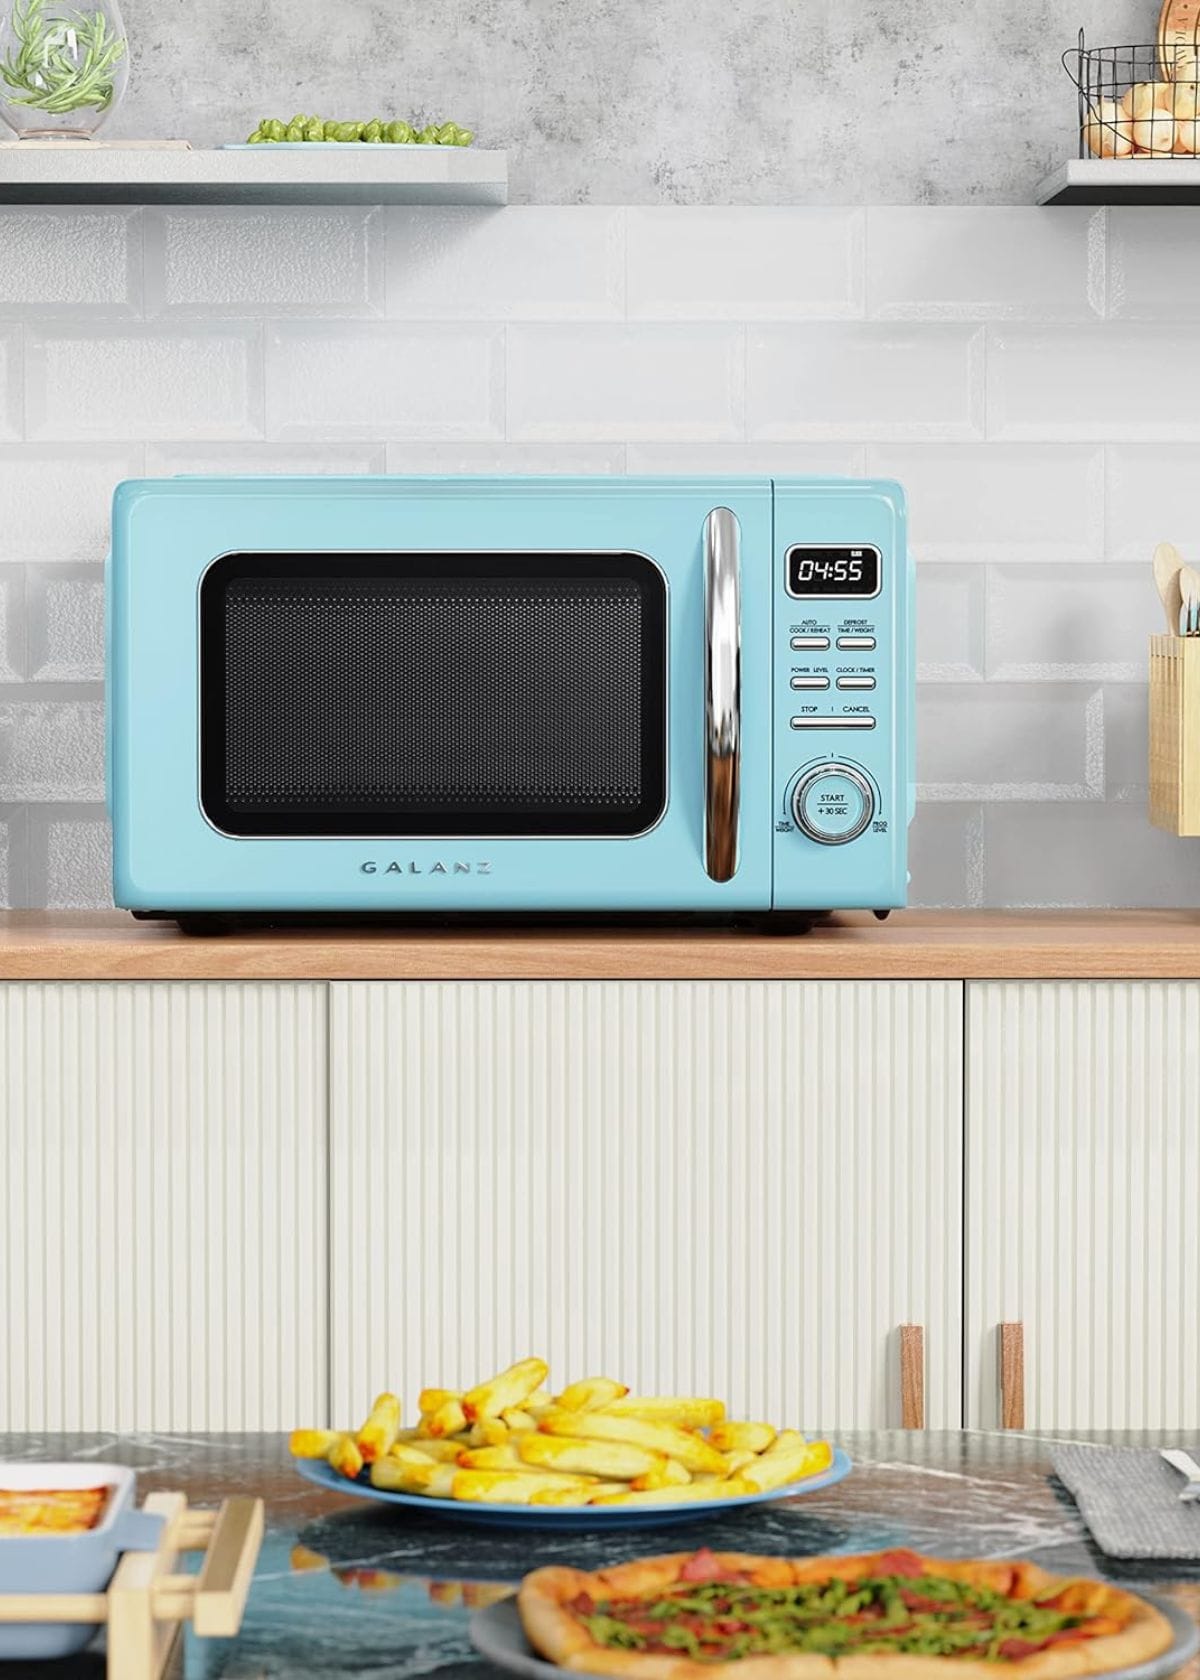 Best Retro Microwaves: A Blend of Nostalgia and Modern Technology